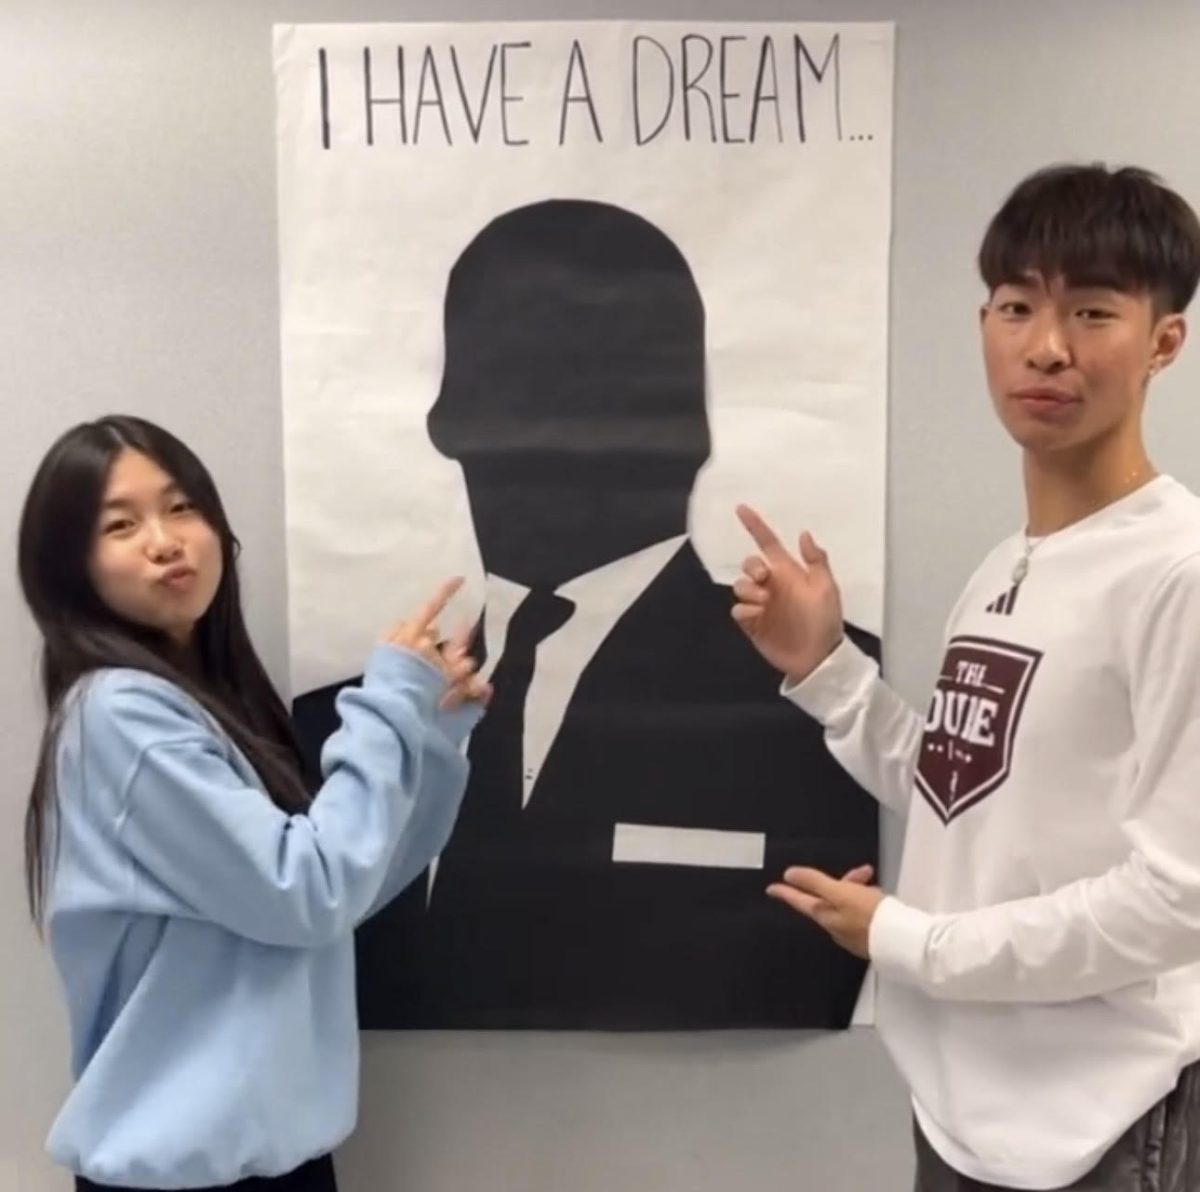 Senior Ryan Nguyen and sophomore Janet Duong advertise STUCO’s “I Have A Dream” poster near the library. Student council members are allowed to write one fact about Martin Luther King Jr. to earn one point.